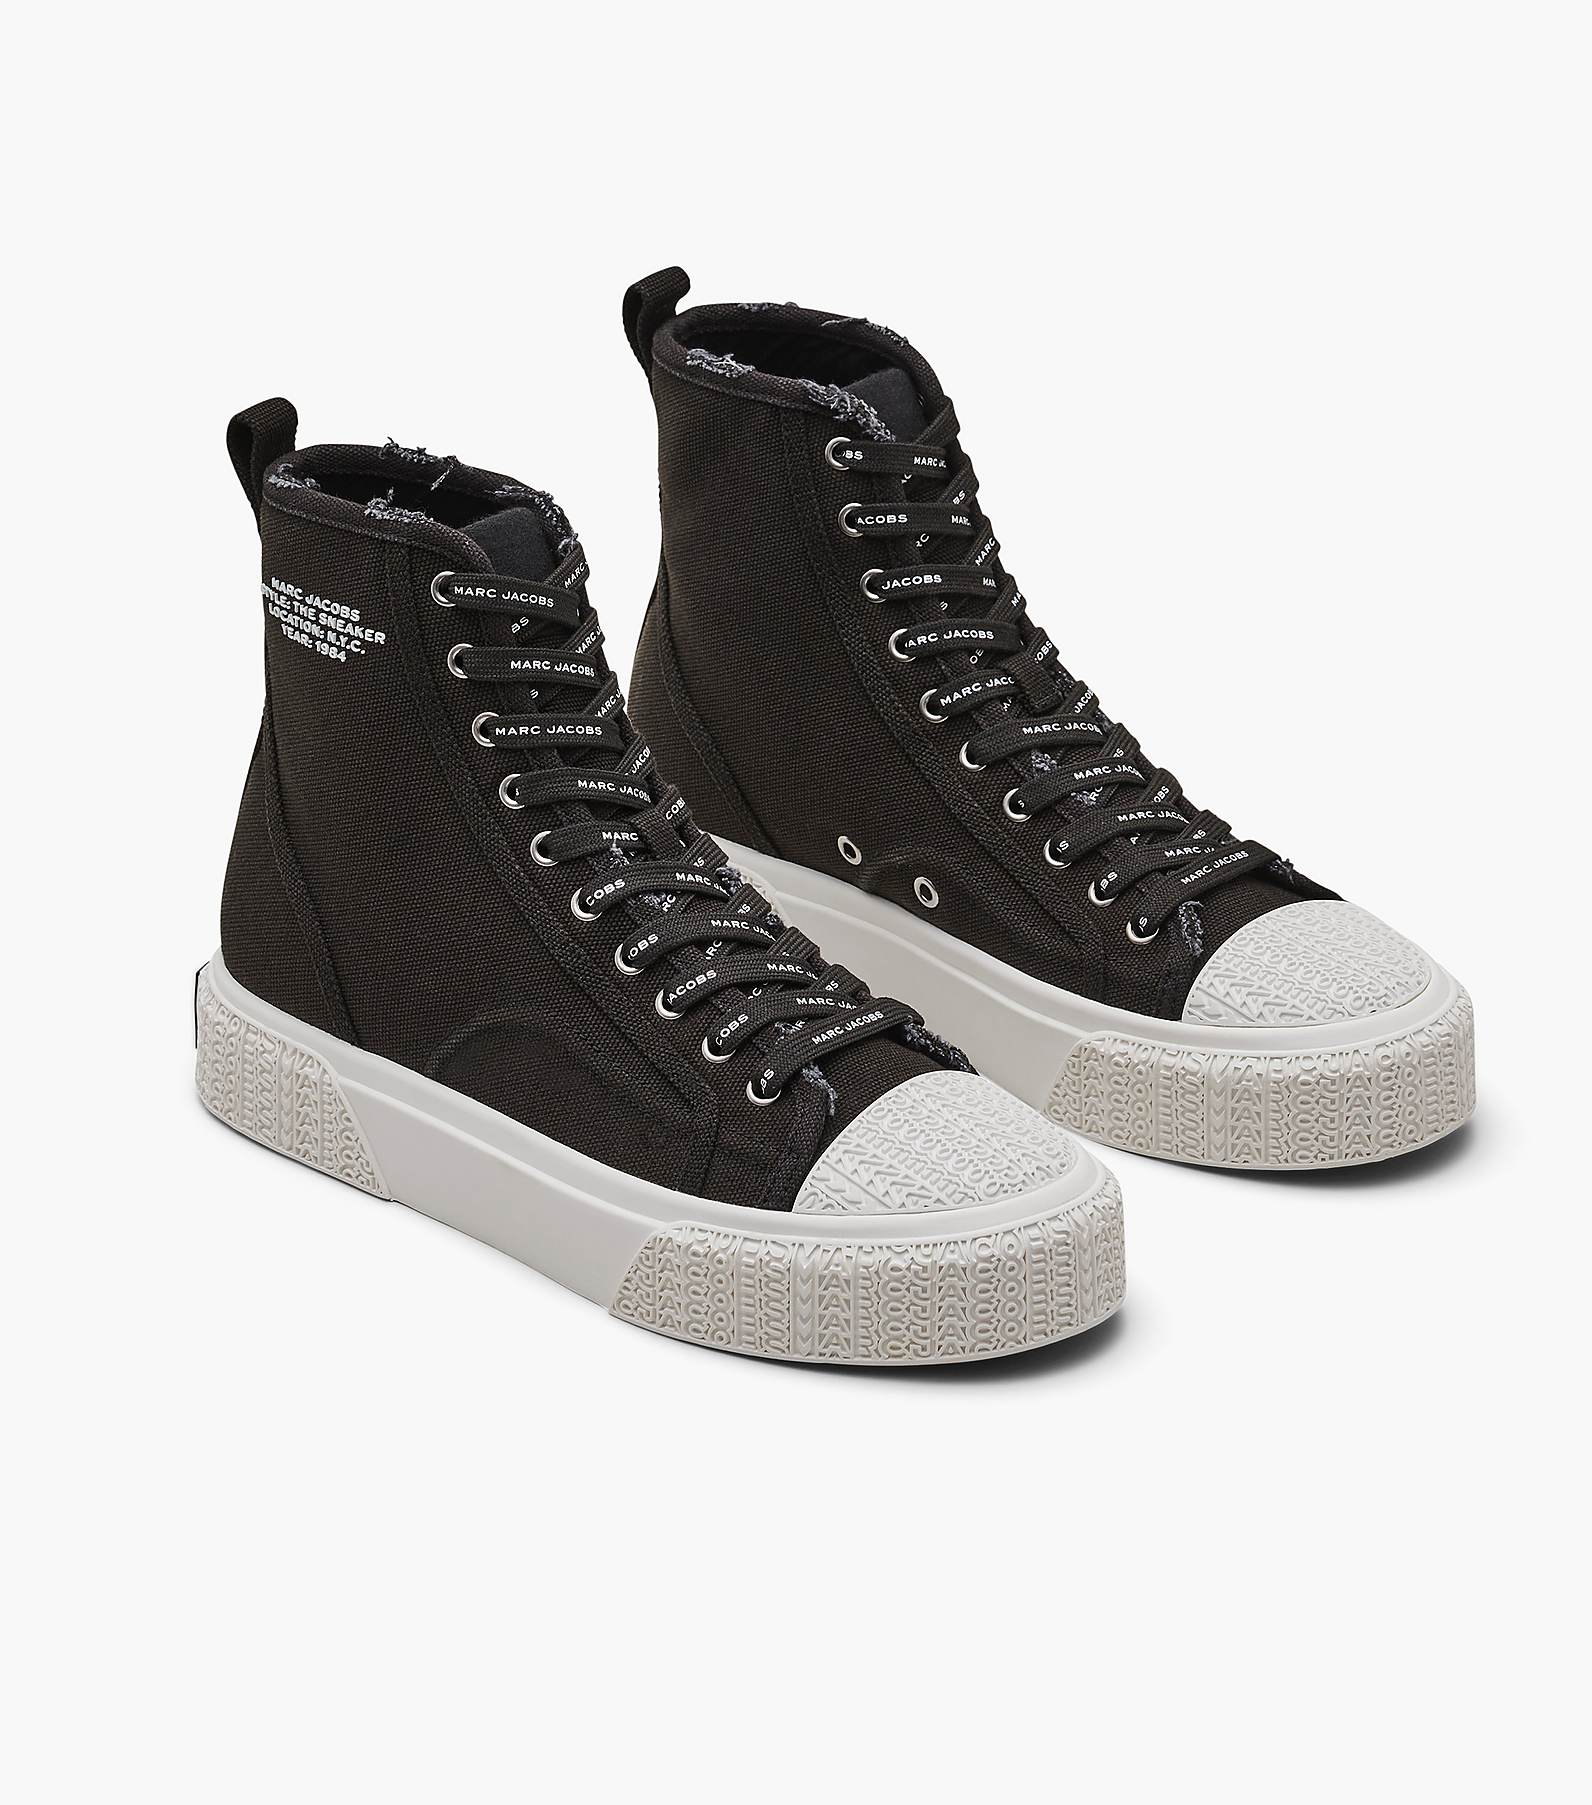 THE CANVAS HIGH TOP SNEAKER